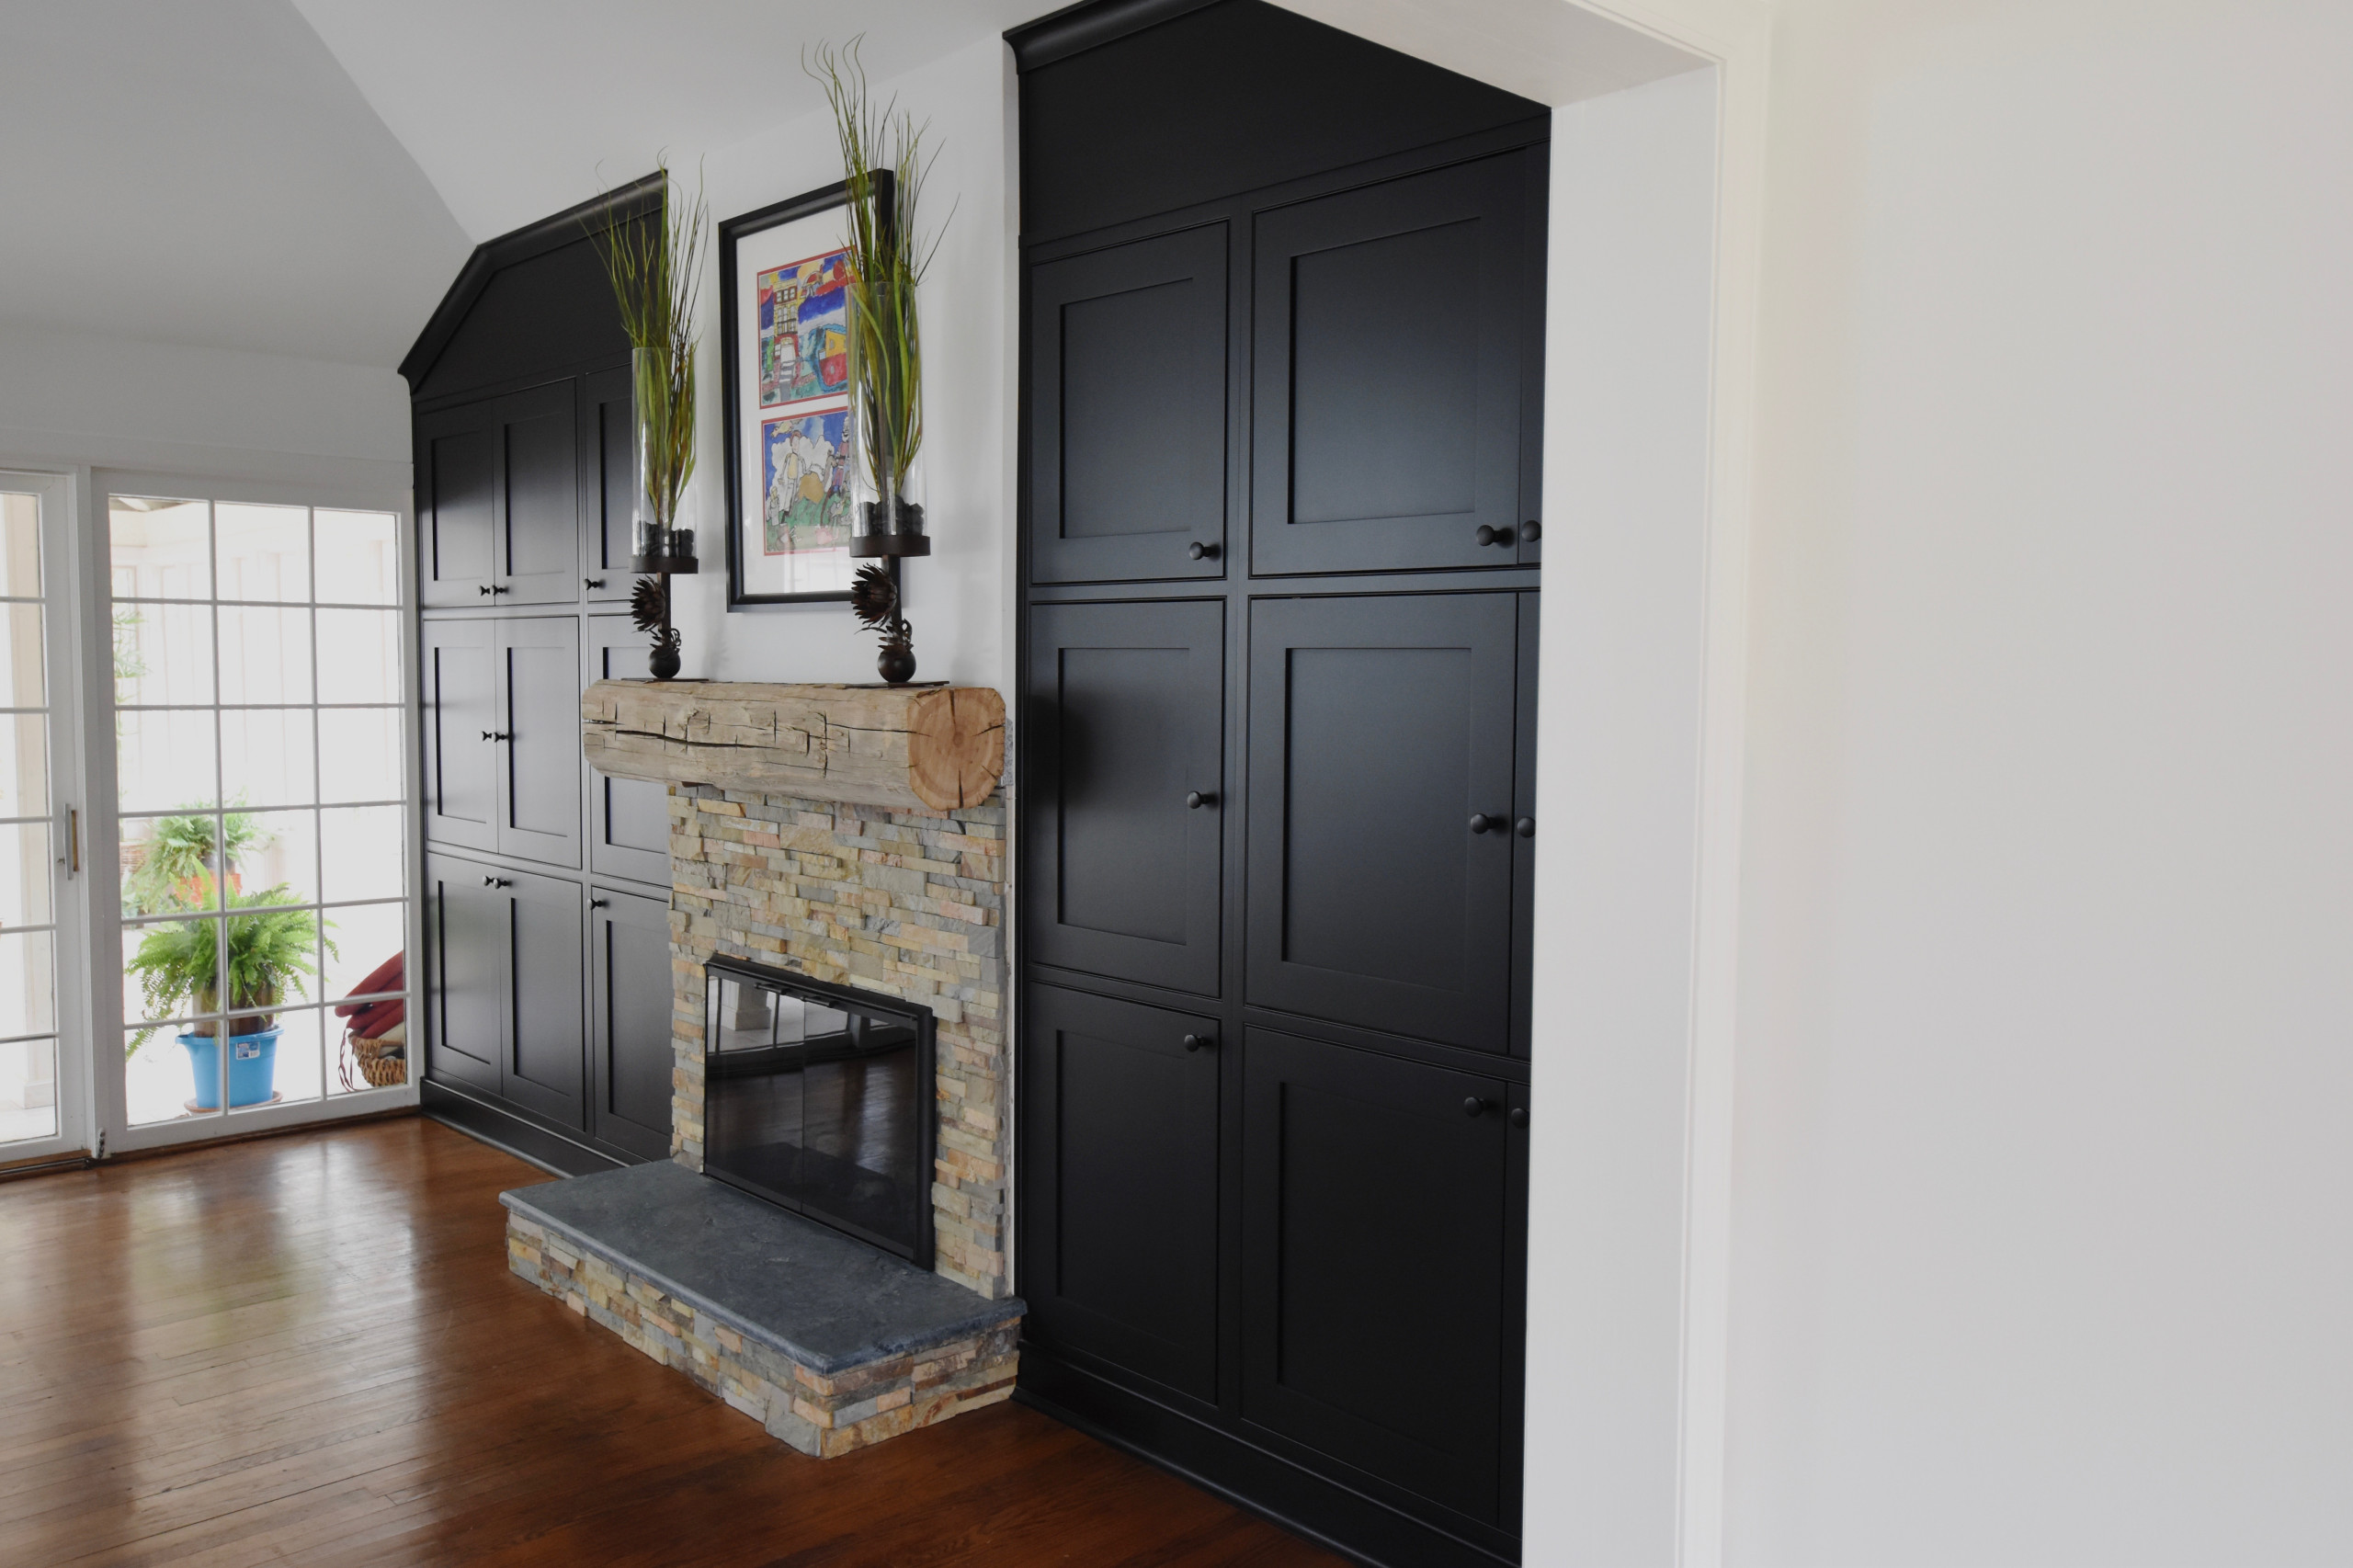 New Kitchen, Rock Fireplaces, Lighting, Master Bathroom & Cabinetry